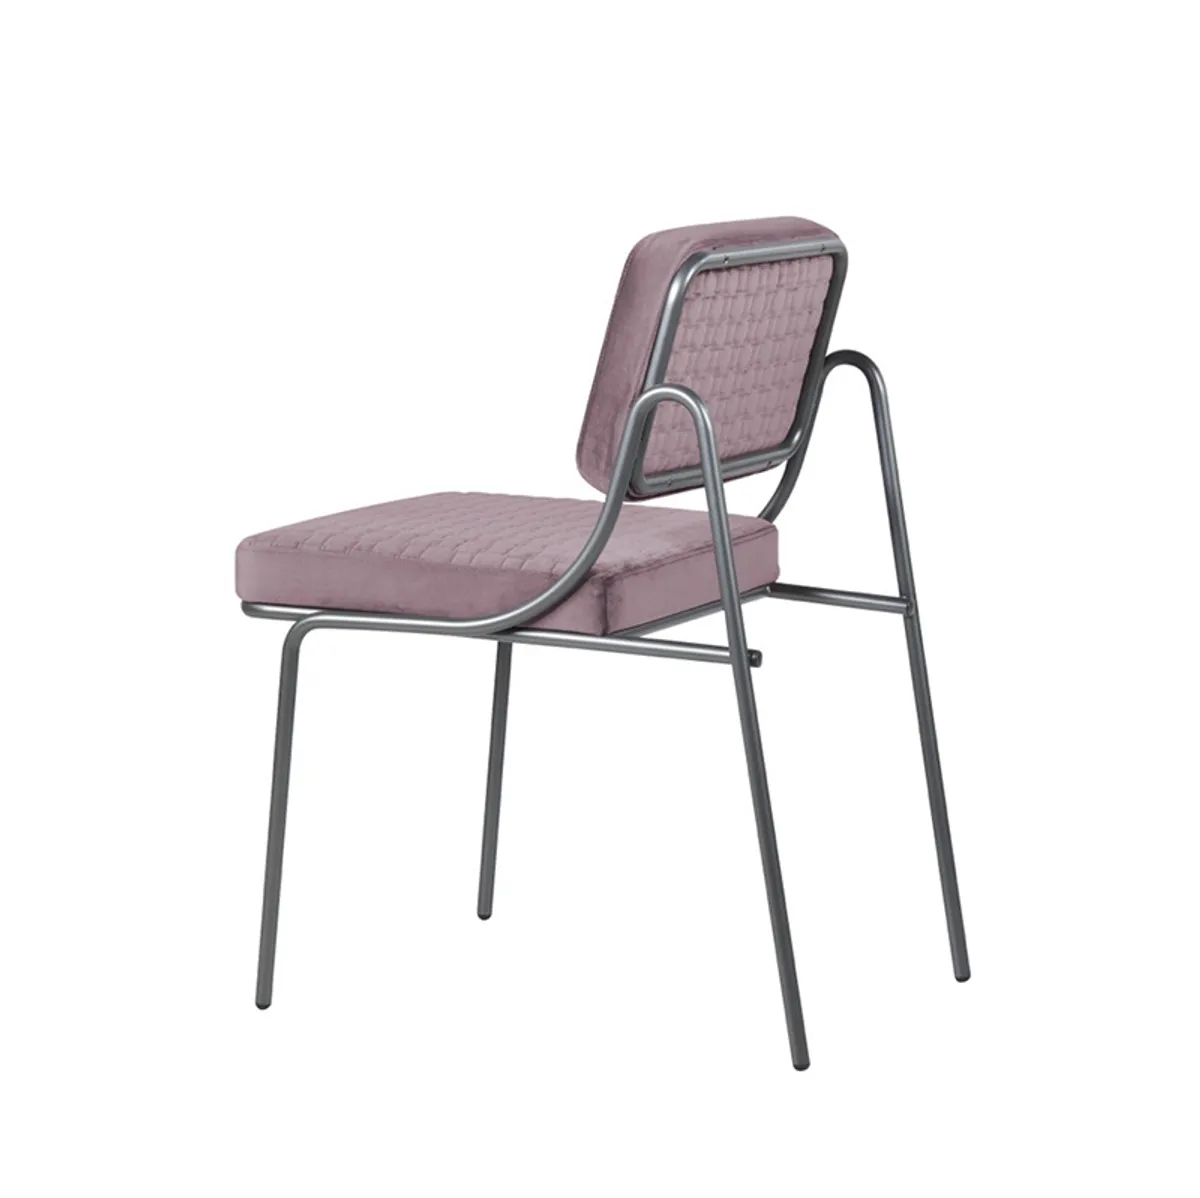 Boogie Chair Metal Frame With Purple Upholstery